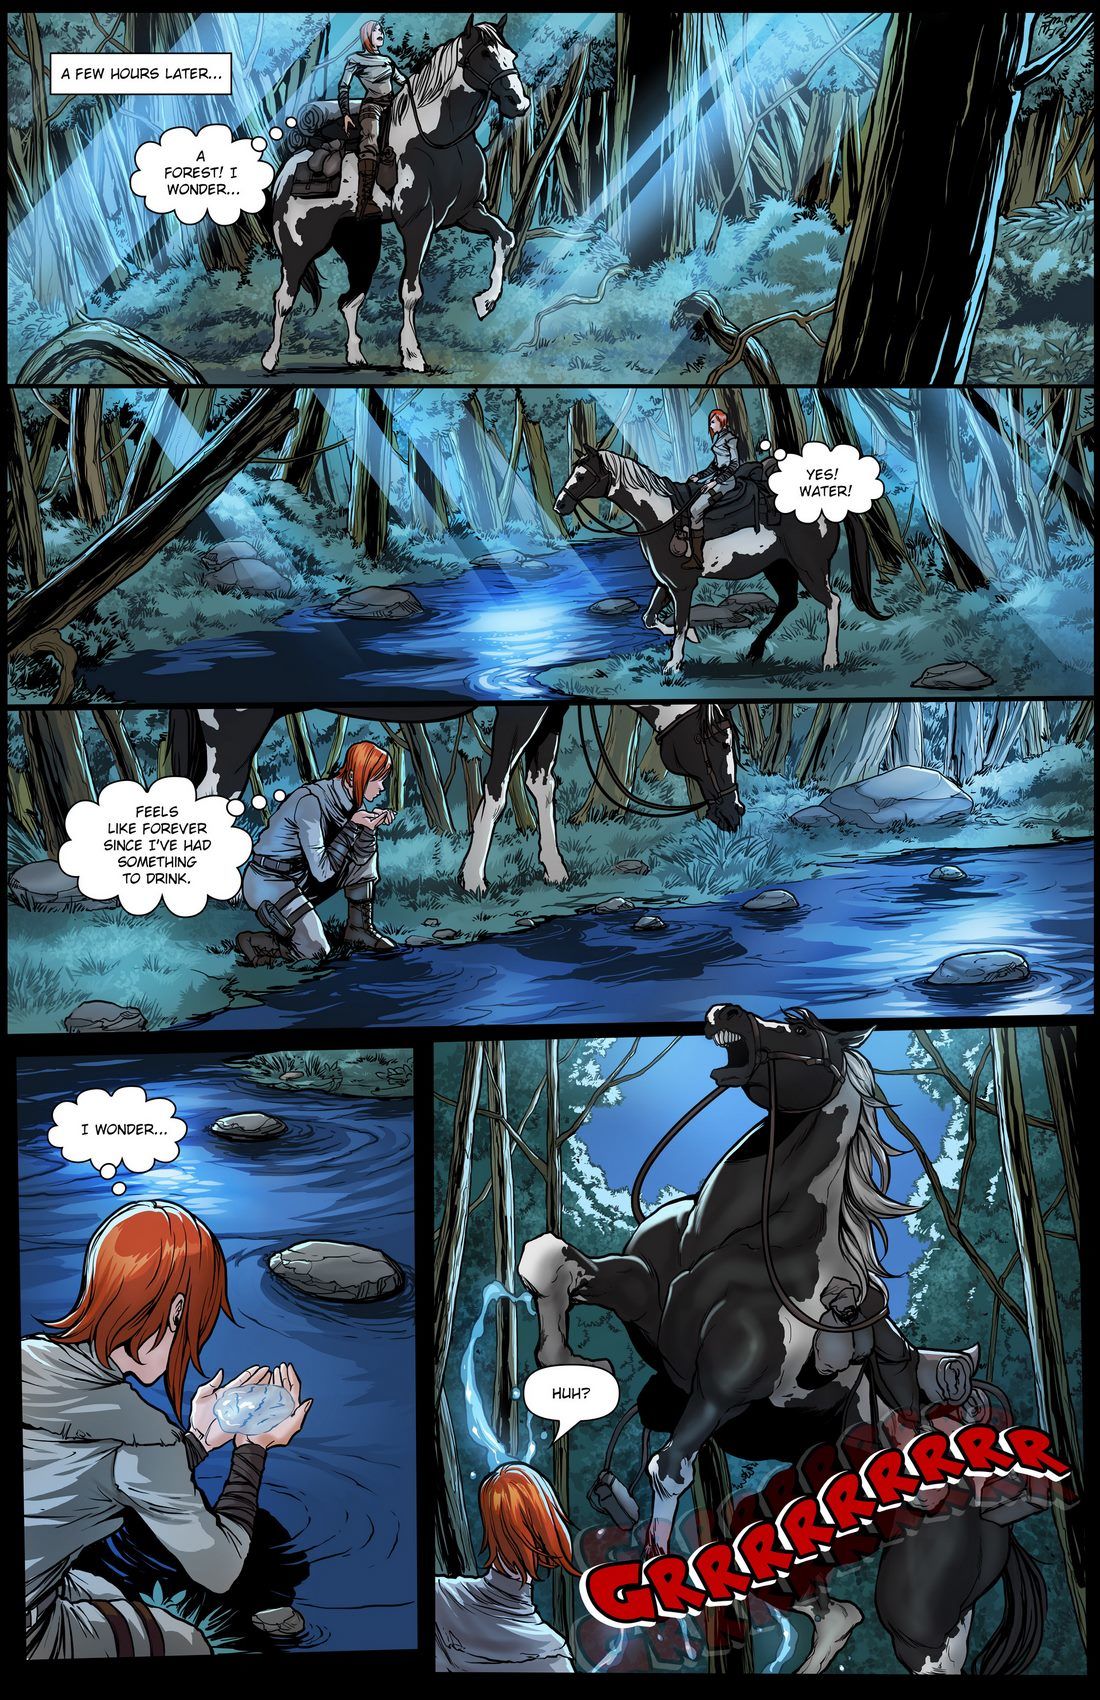 The Strong Shall Survive Issue 02 MuscleFan page 4